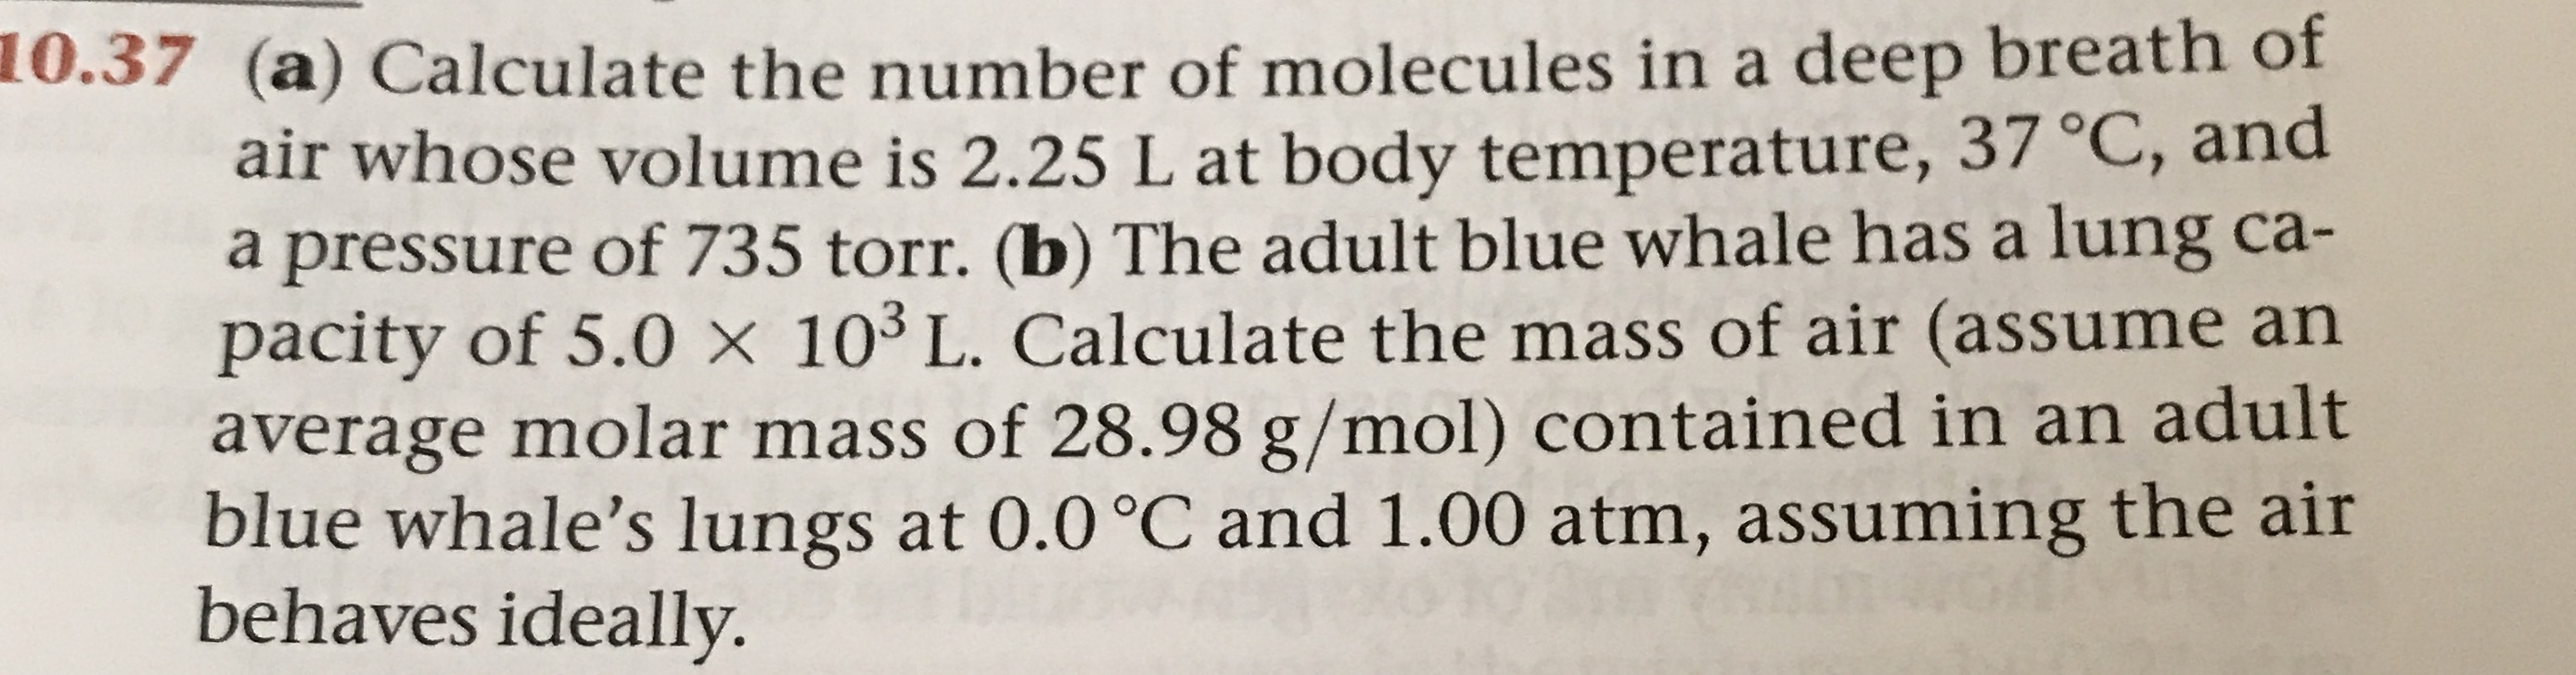 0.37 (a) Calculate the number of molecules in a deep breath of
air whose volume is 2.25 L at body temperature, 37 °C, and
a pressure of 735 torr. (b) The adult blue whale has a lung ca-
pacity of 5.0 x 103 L. Calculate the mass of air (assume an
average molar mass of 28.98 g/mol) contained in an adult
blue whale's lungs at 0.0 °C and 1.00 atm, assuming the air
behaves ideally.
